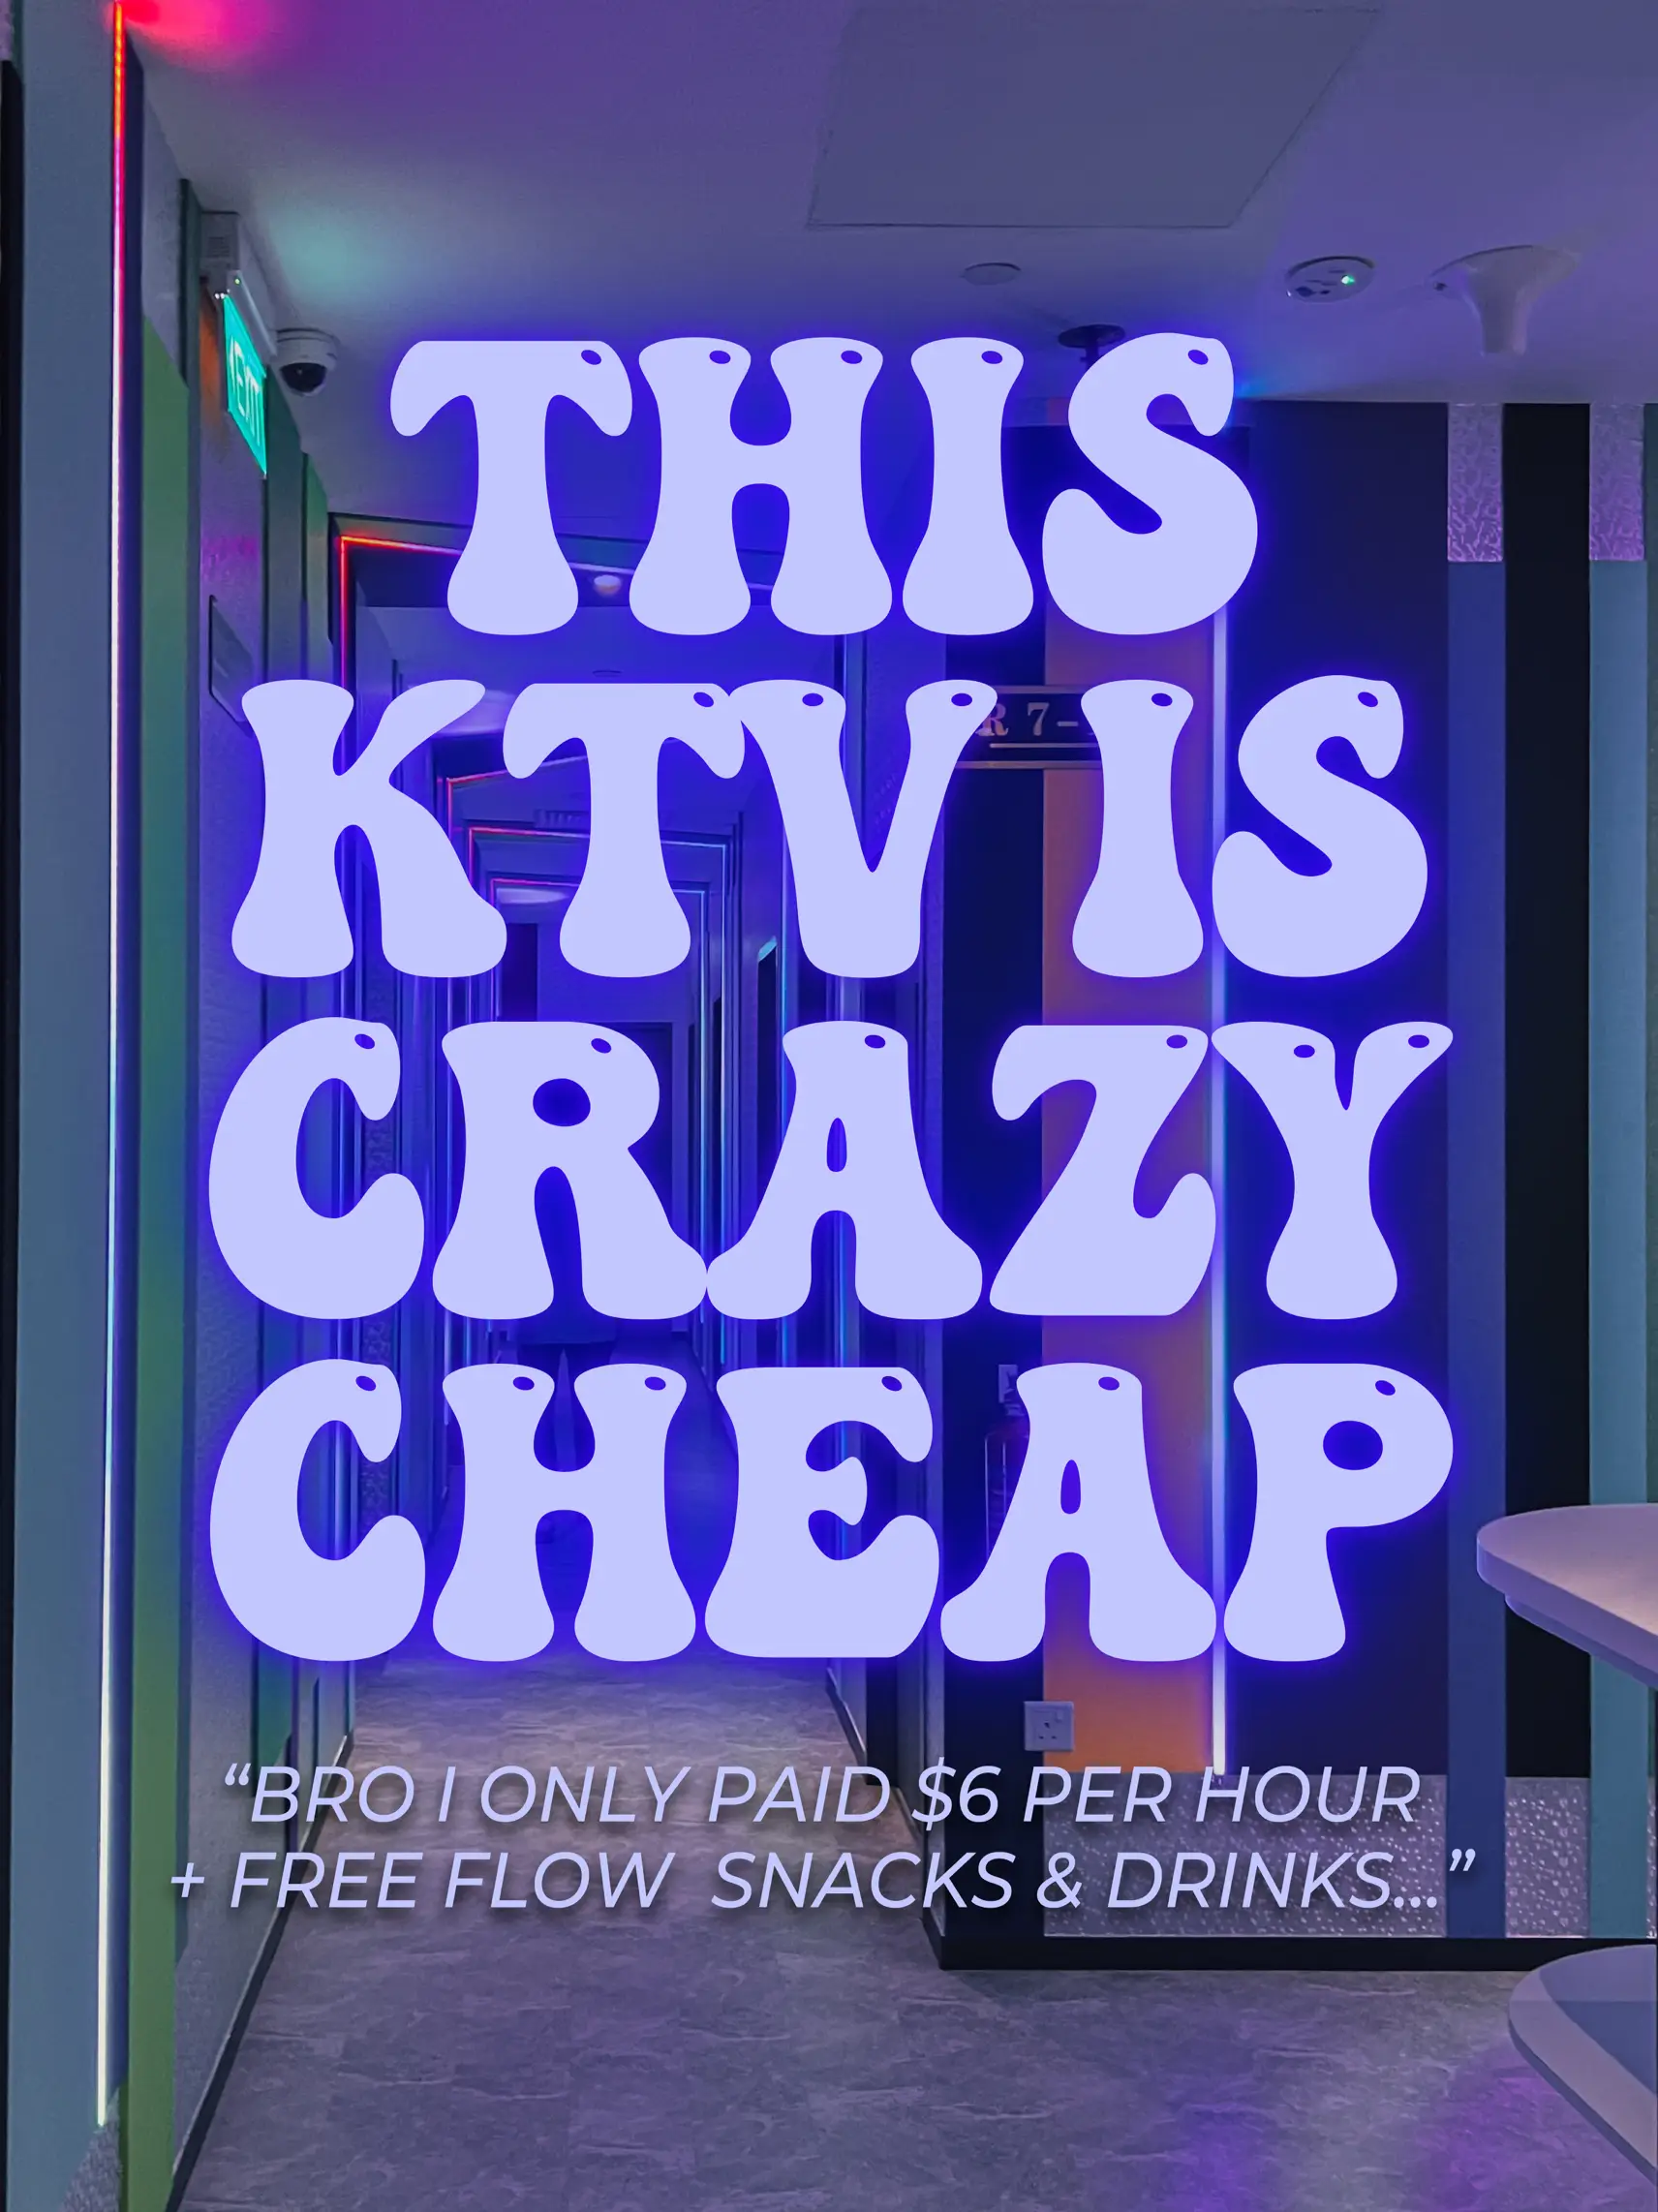 ktv from $4/hr per pax + free drinks & snacks 🥵🤌🤌 's images(0)